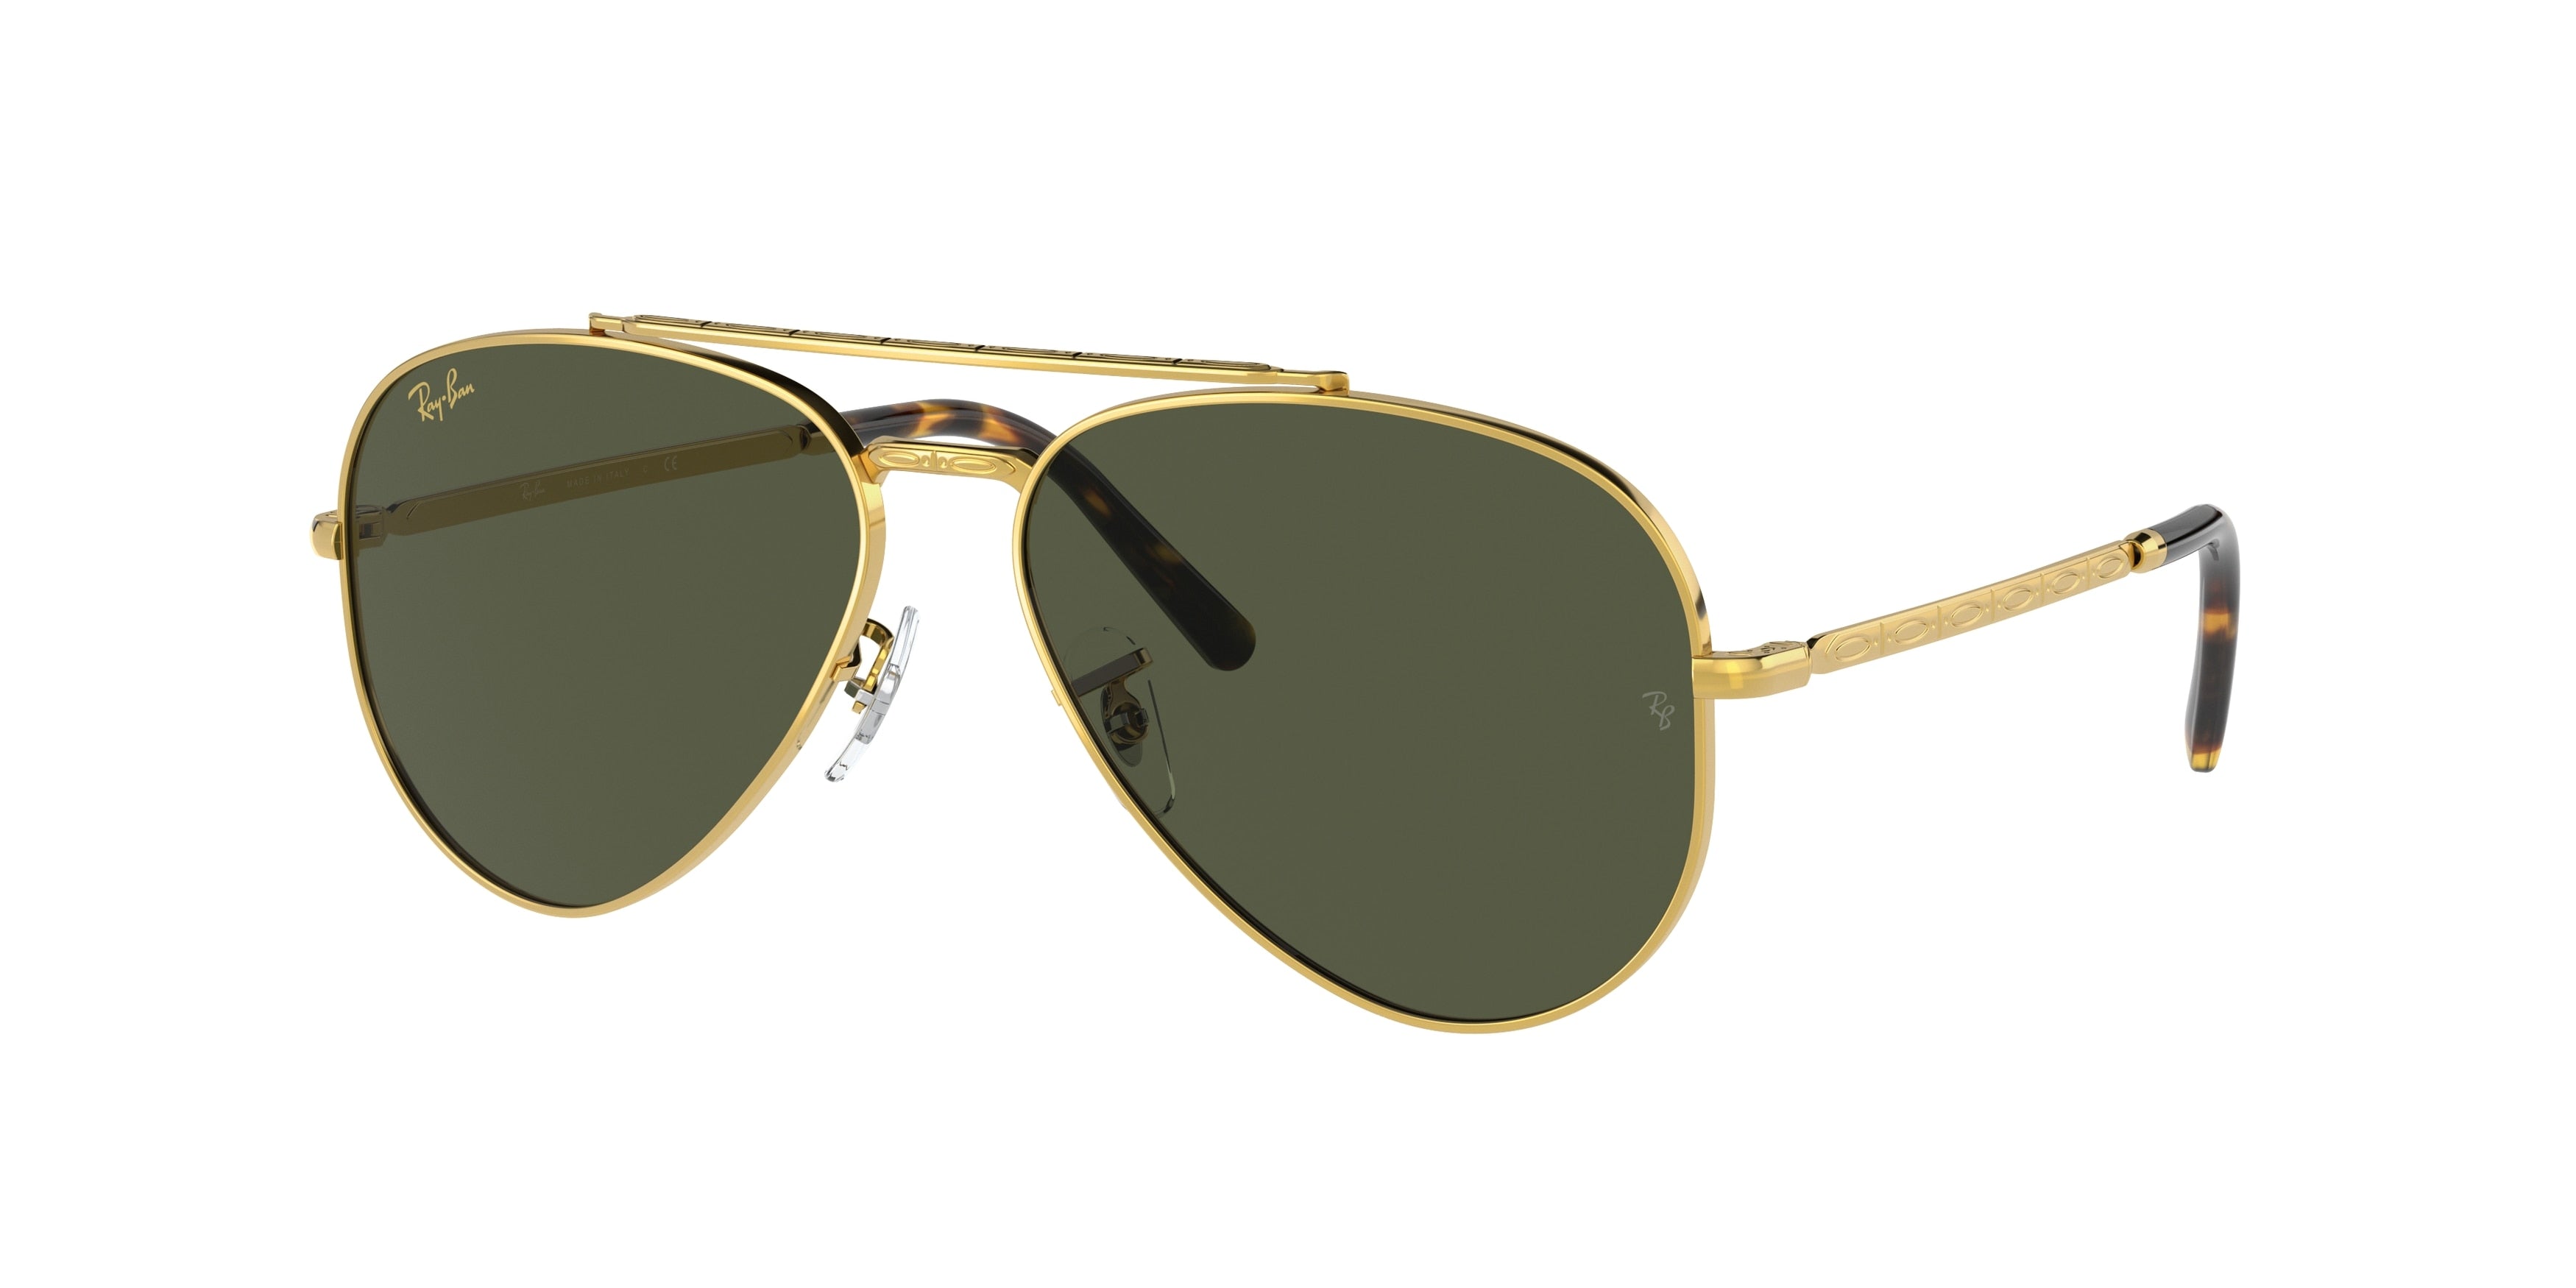 Ray-Ban NEW AVIATOR RB3625 Pilot Sunglasses  919631-Gold 61-140-14 - Color Map Gold